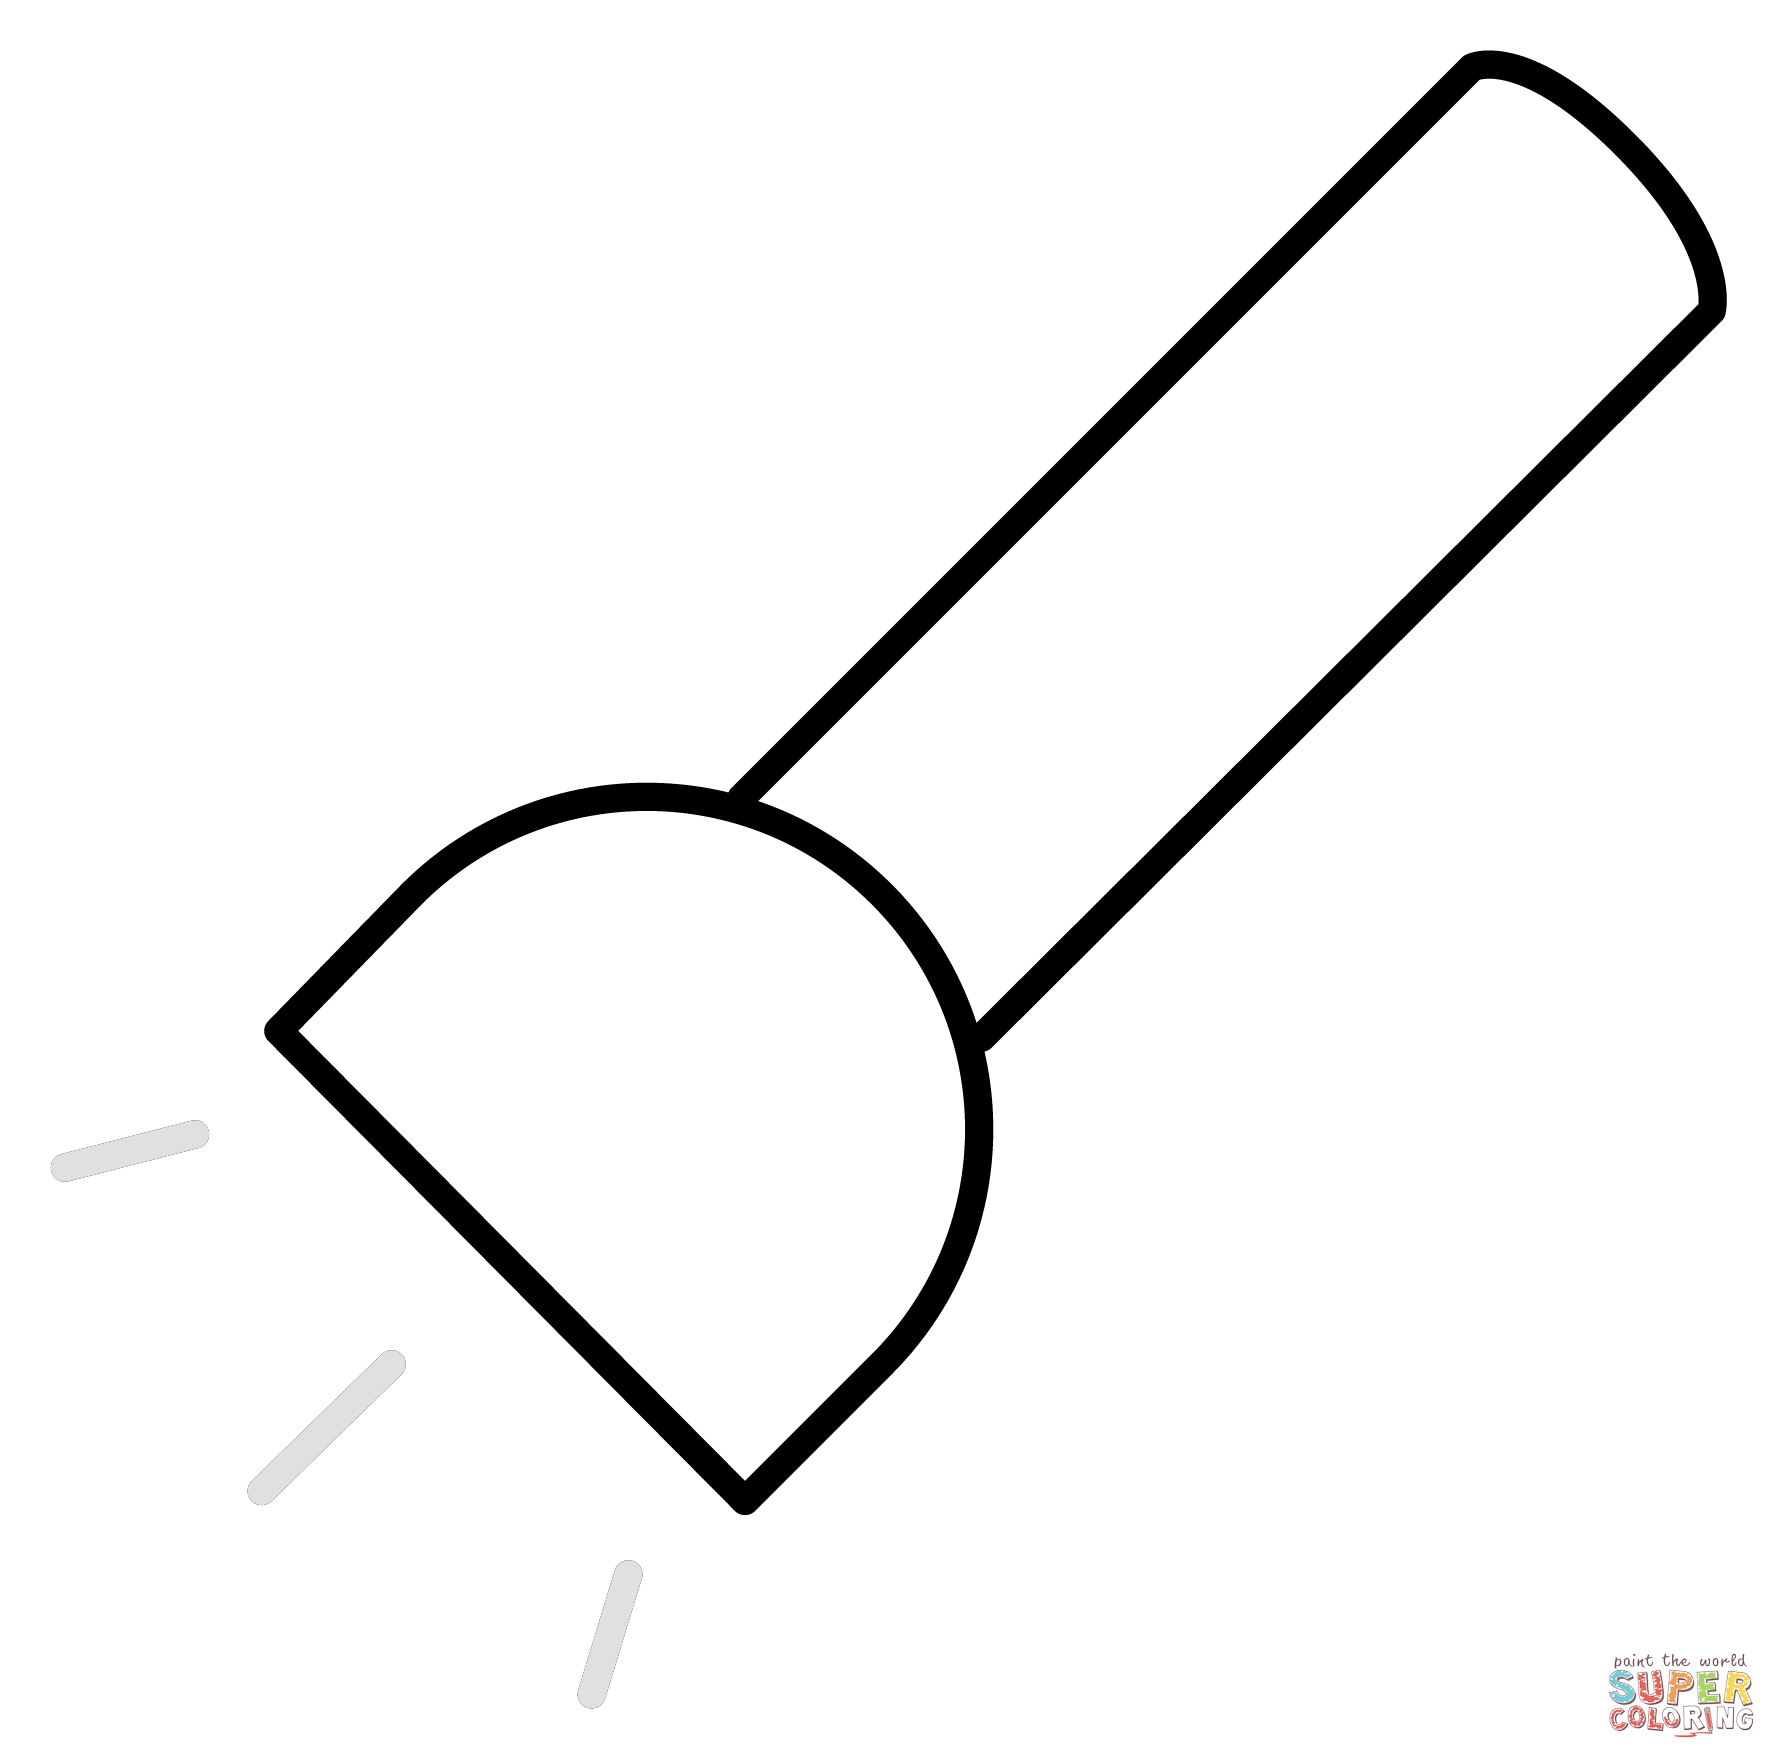 Flashlight emoji coloring page free printable coloring pages